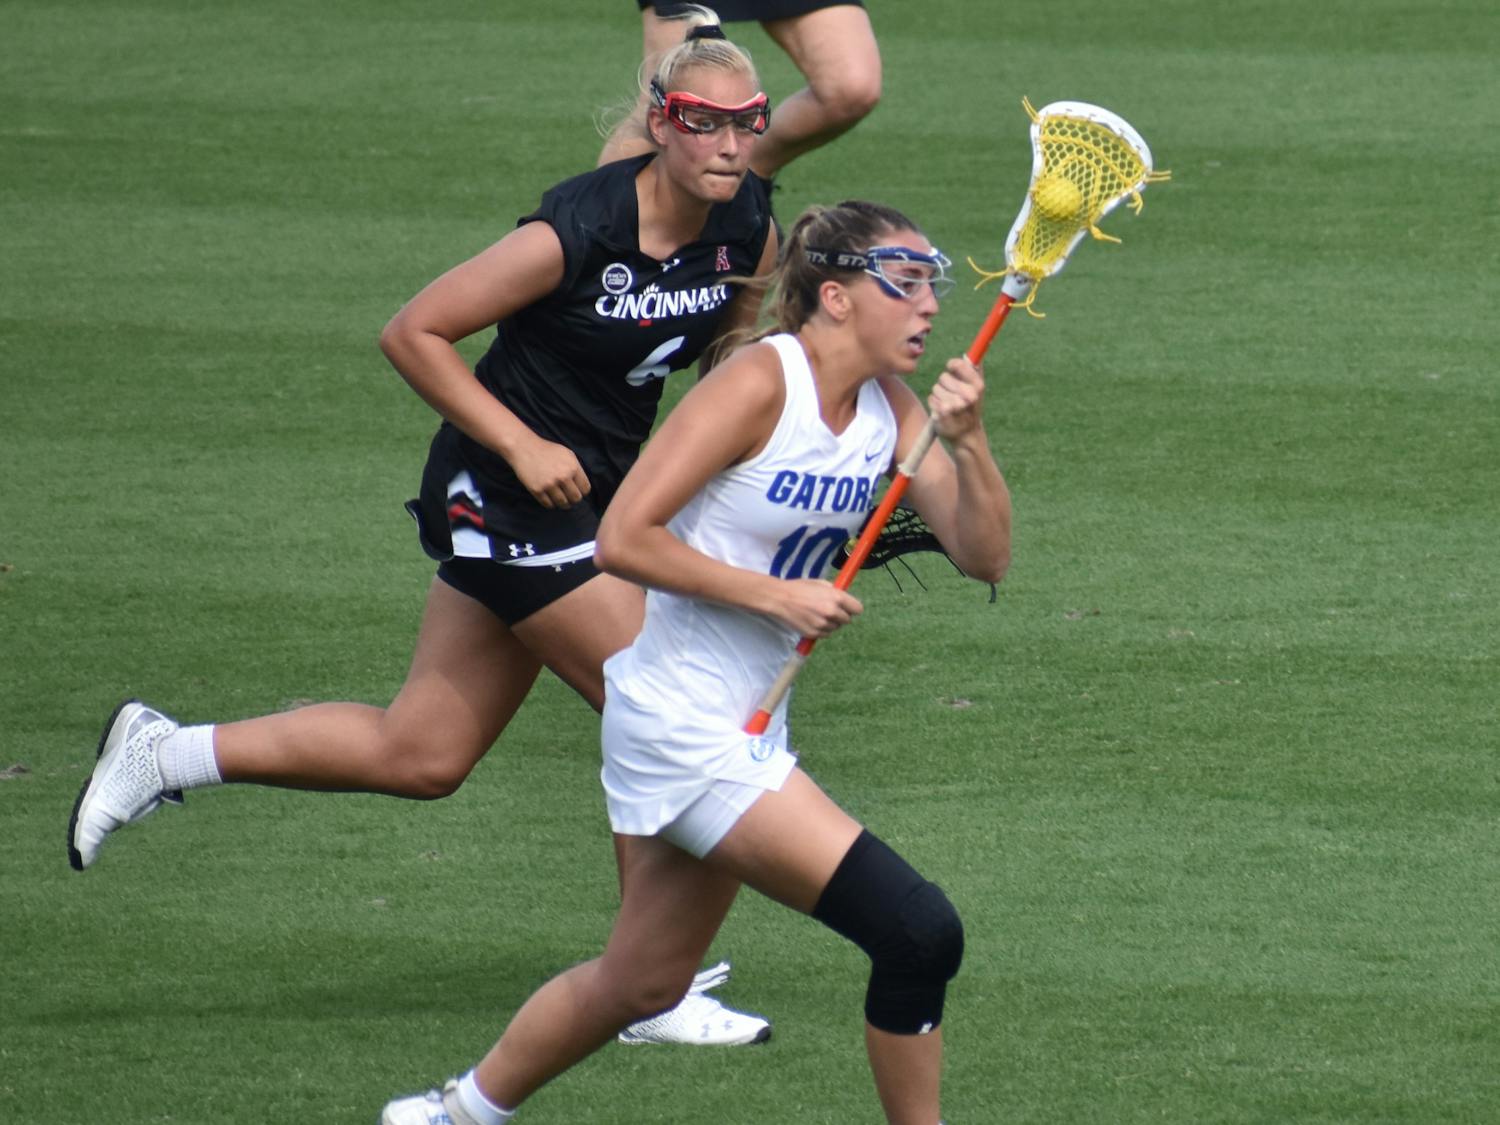 Danielle Pavinelli plays against Cincinnati March 26. She scored her 100th goal of her career at UF Sunday.